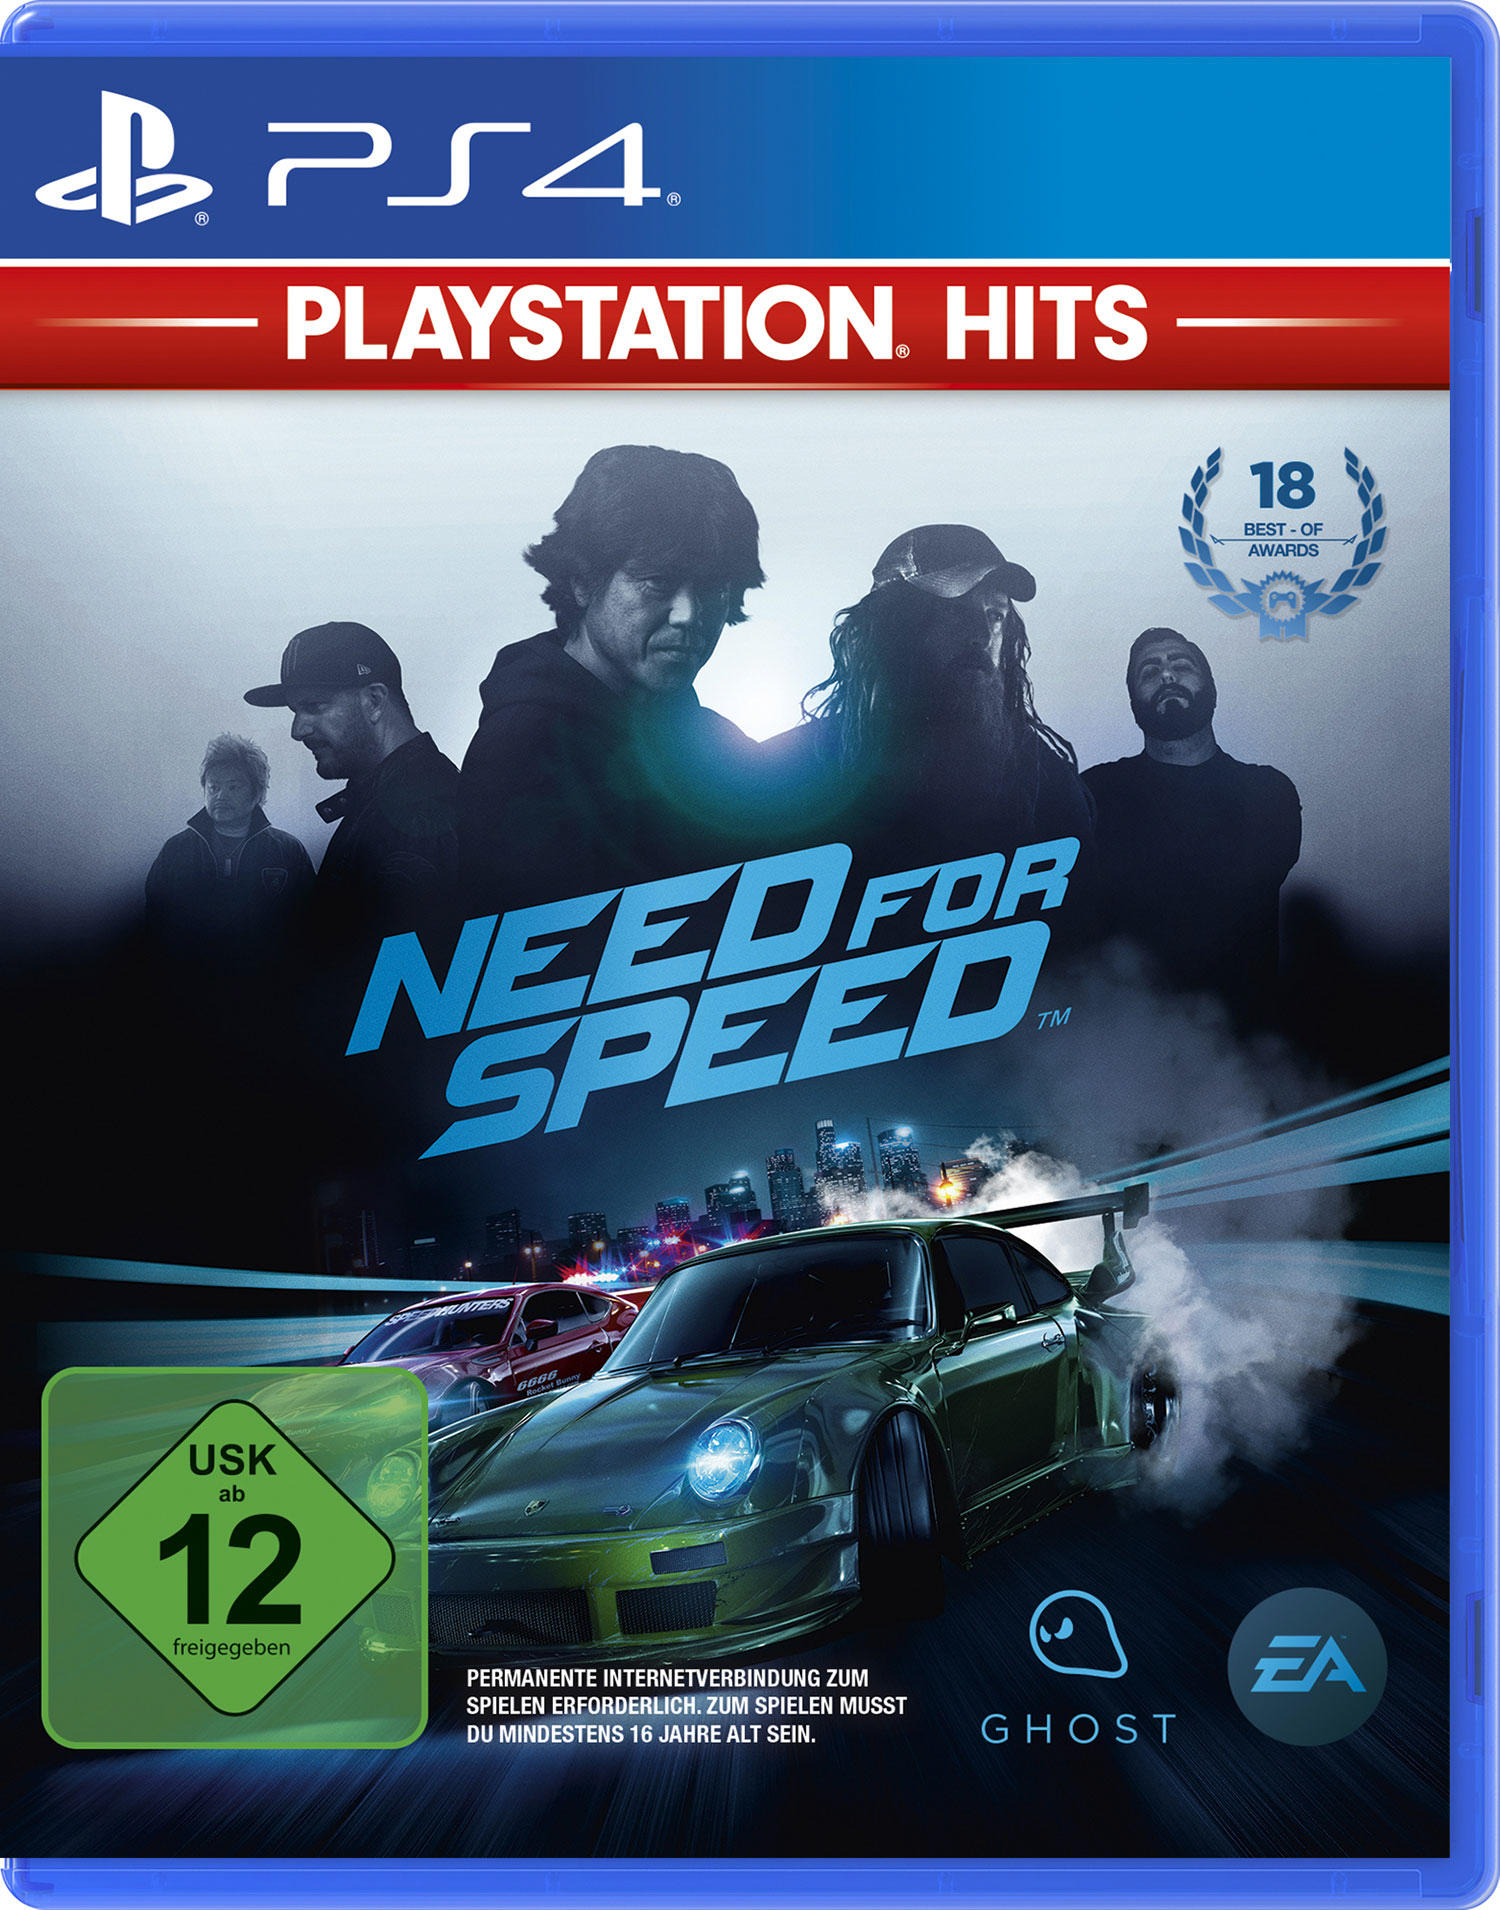 Hits: Speed - PlayStation Need 4] for [PlayStation